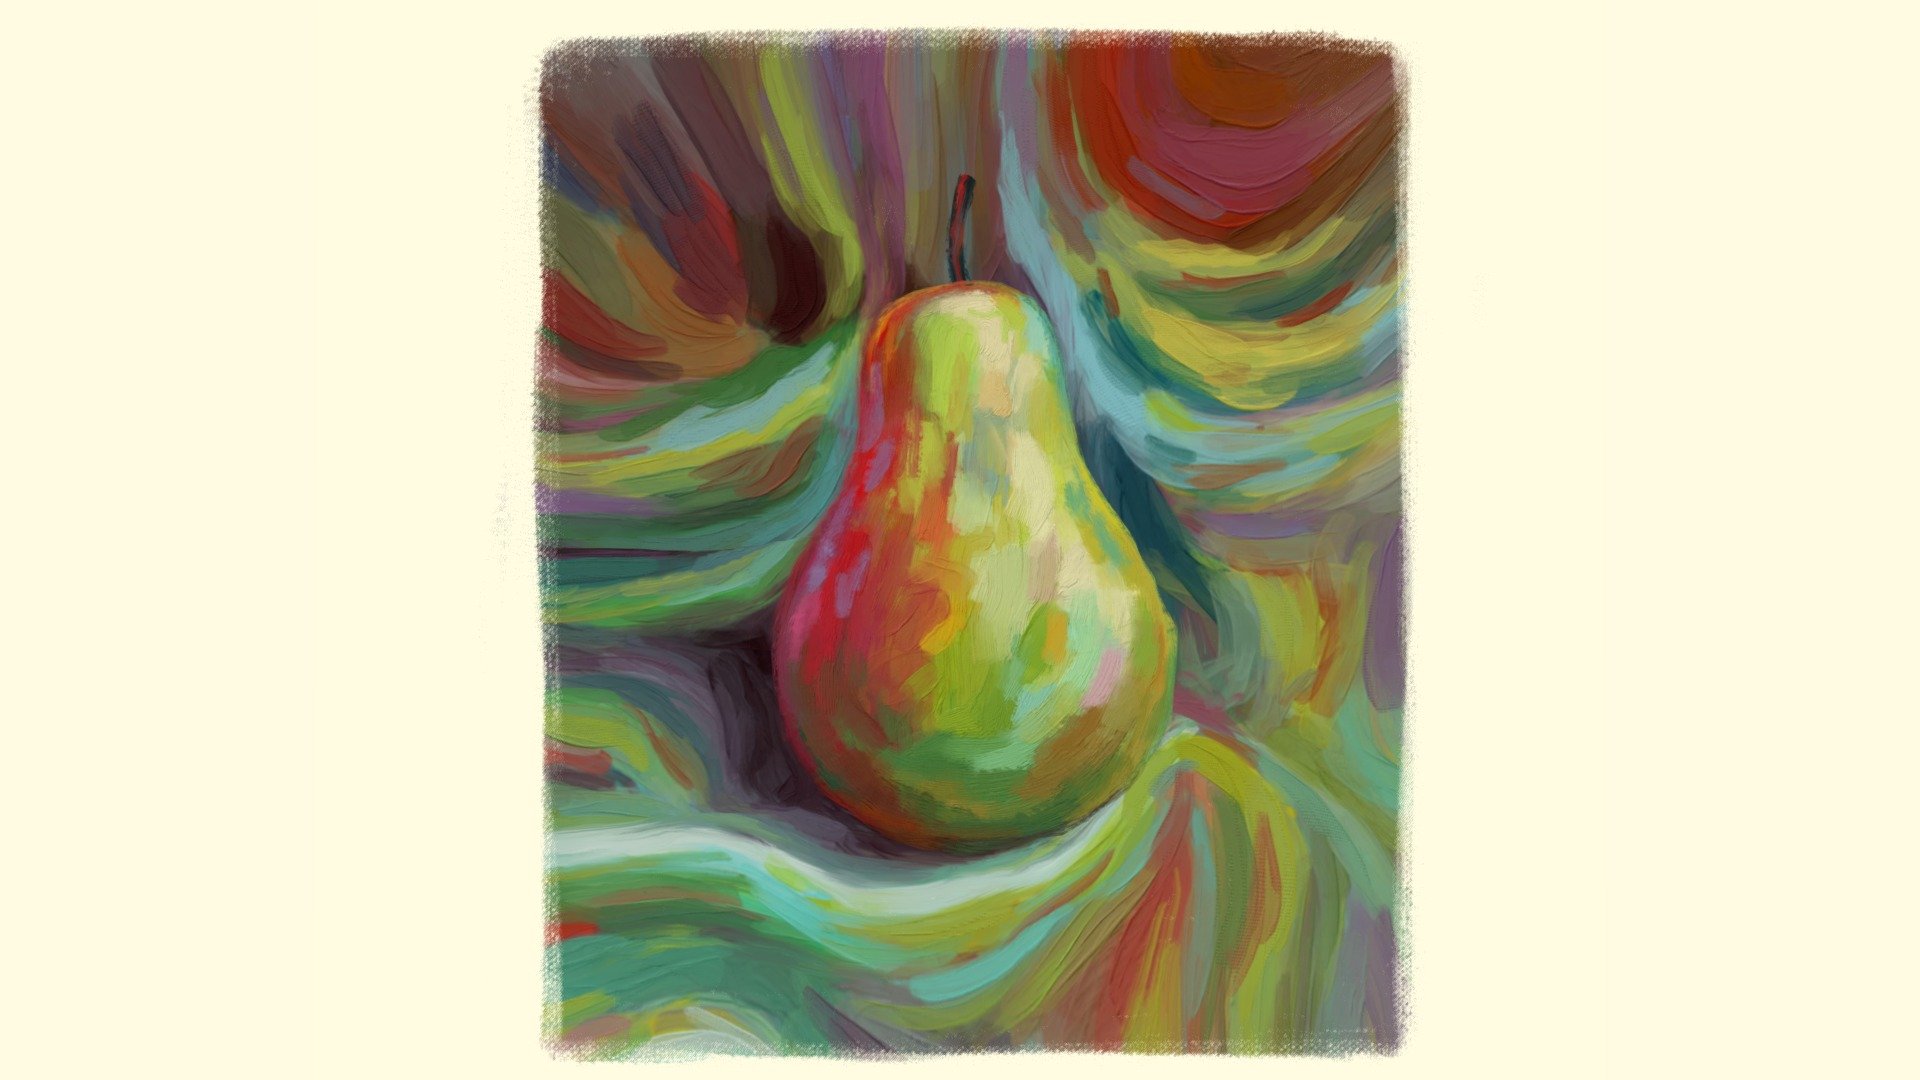 This one is based on an artwork by impressionist Talya Johnson.
Check out the original! https://pixels.com/featured/just-a-pear-impressionist-still-life-talya-johnson.html

Modeled and rendered with Blender 3.3. I wanted to try some realistic looking traditional media texturing. Rebelle 6 did the job with perfection!
Instagram: https://www.instagram.com/reel/CqDmRVvsxdA/?utm_source=ig_web_copy_link
Twitter: https://twitter.com/FaruqTawsif/status/1638176235703644161?s=20 - "Just A Pear" Impressionist art re construction - 3D model by Omar Faruq Tawsif (@omarfaruqtawsif32) 3d model